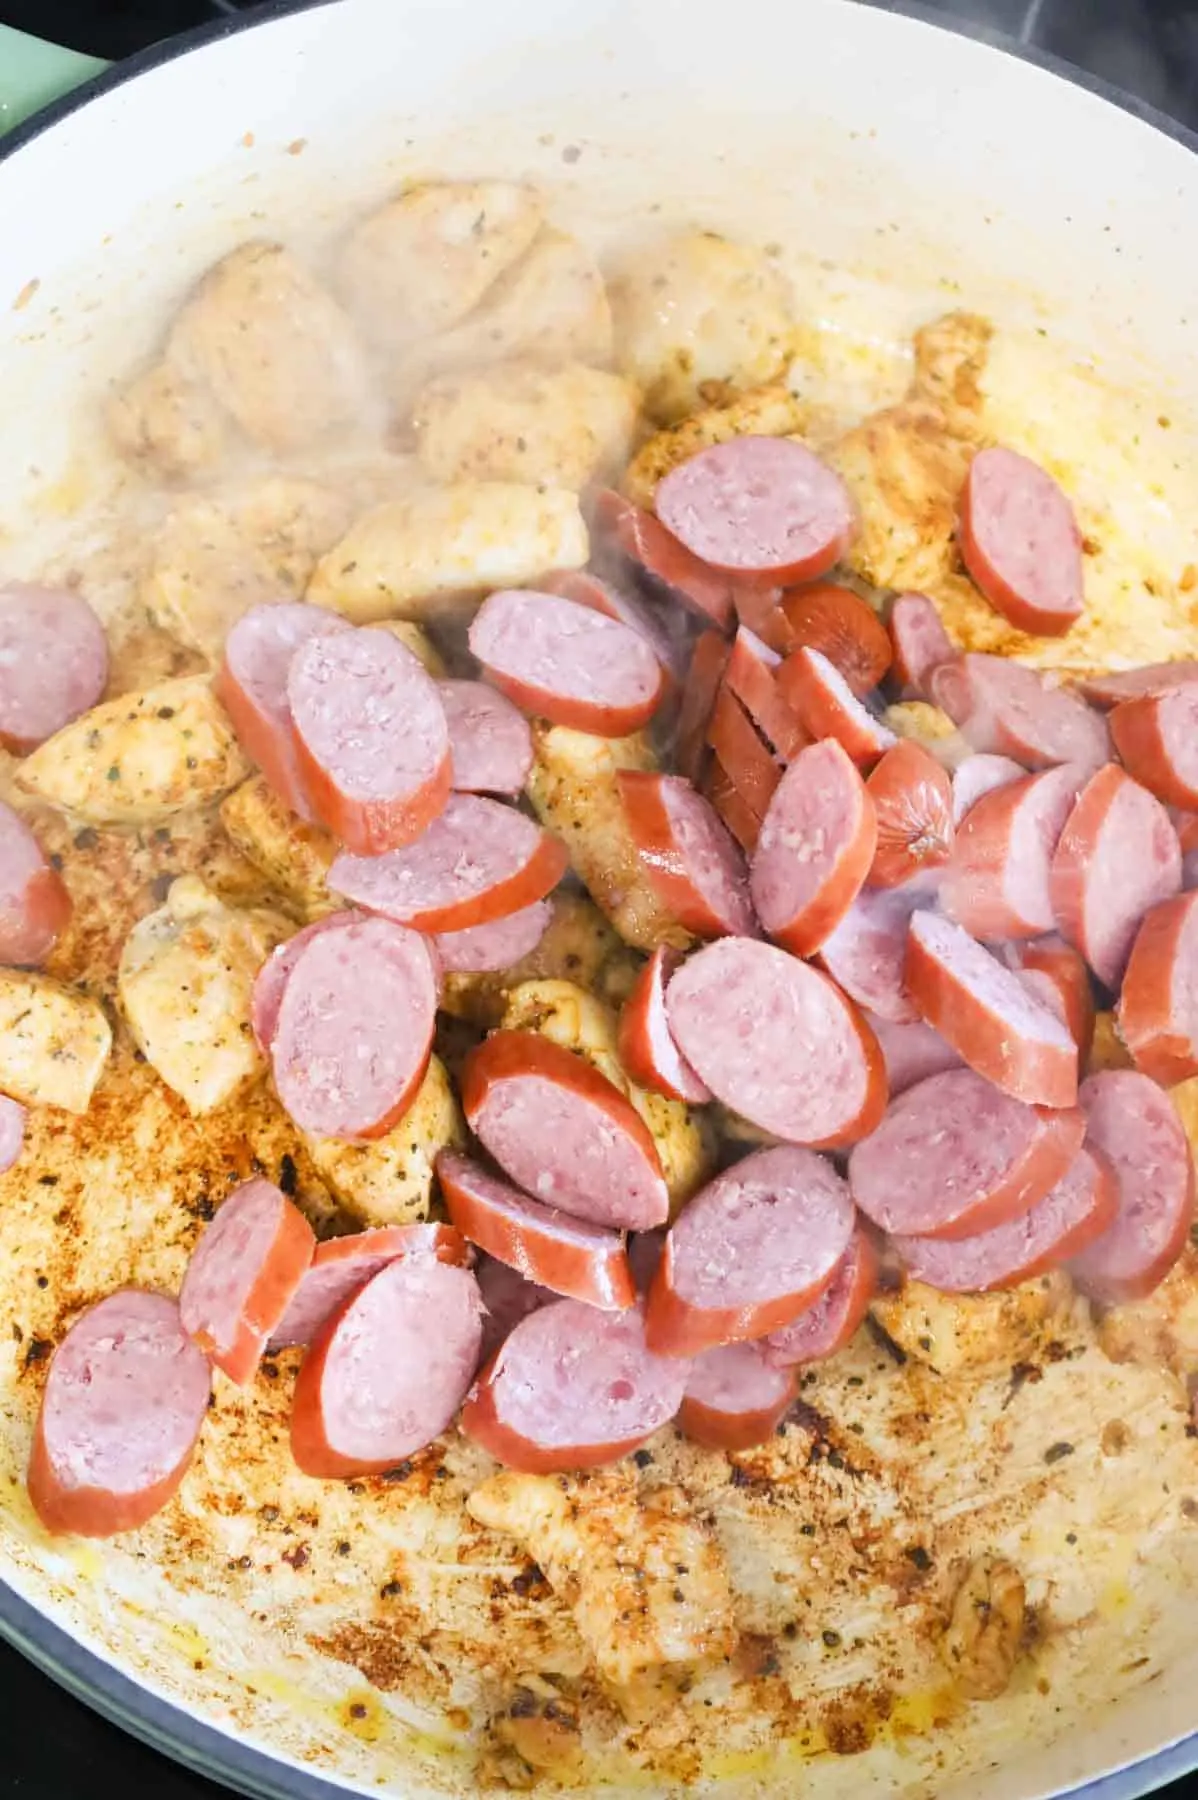 smoked sausage slices added to skillet with chicken breast chunks